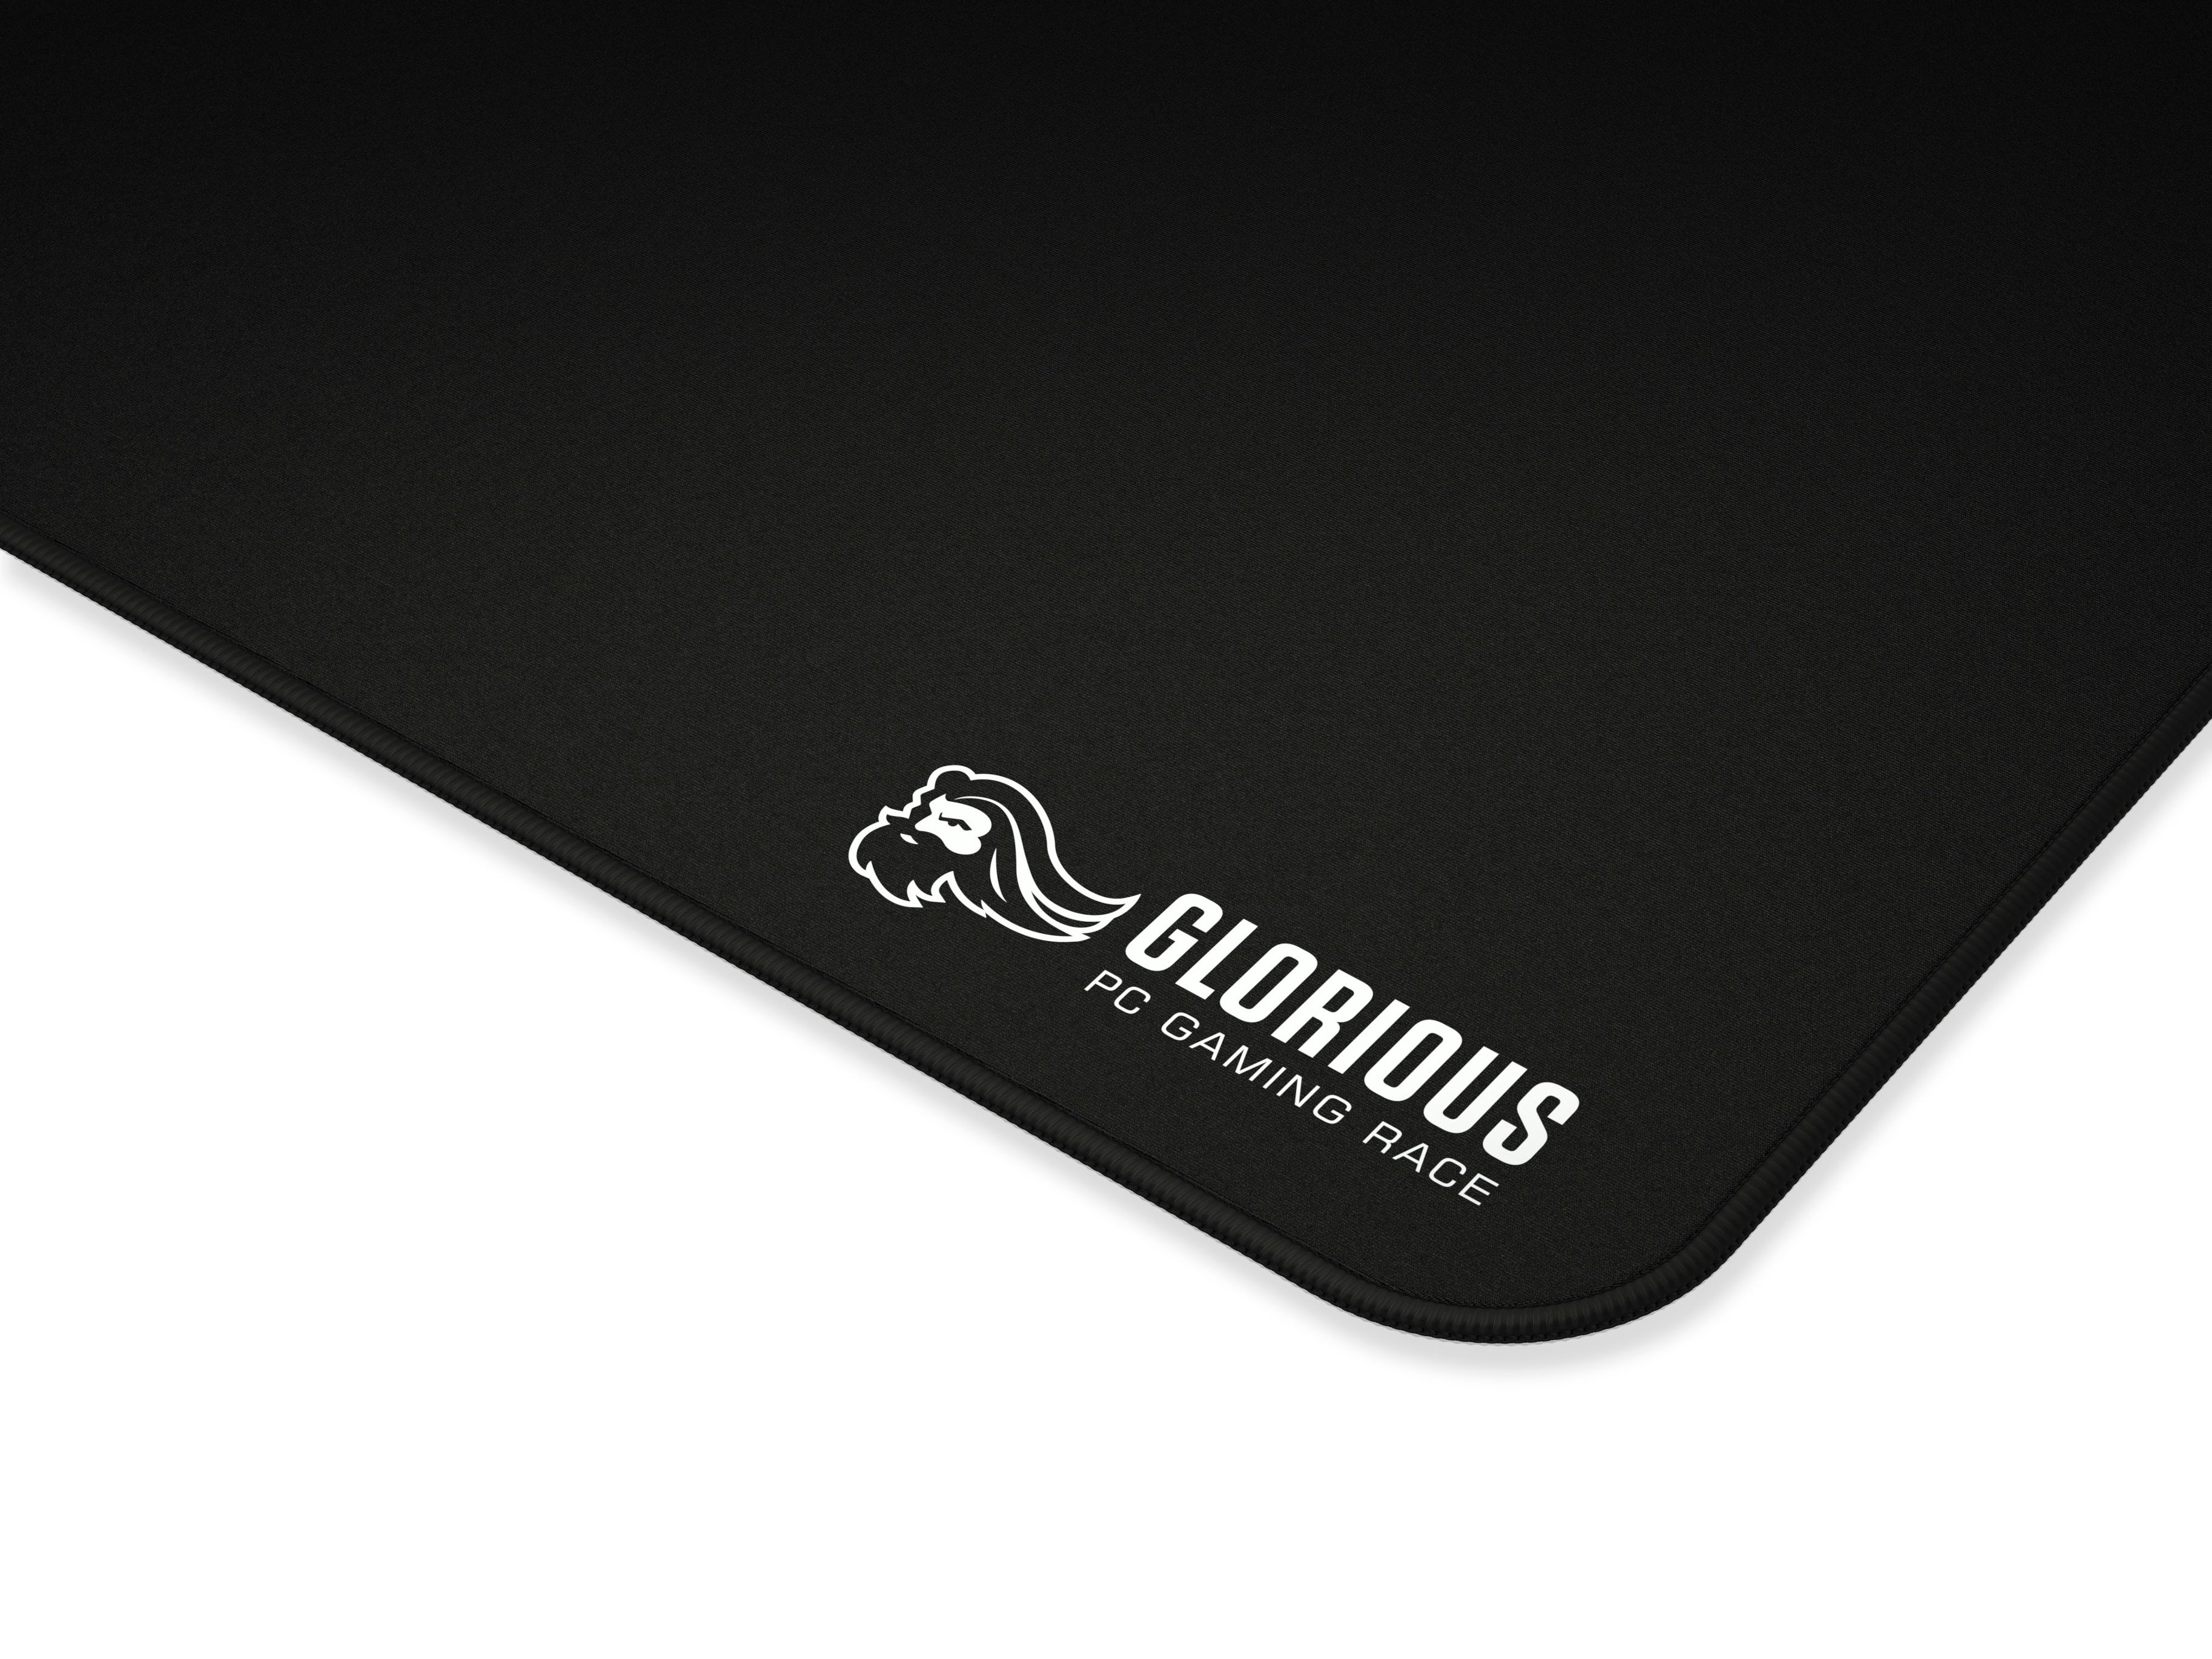 Glorious 3XL Extended Gaming Mouse Mat/Pad Large, Wide Black G-3XL ...